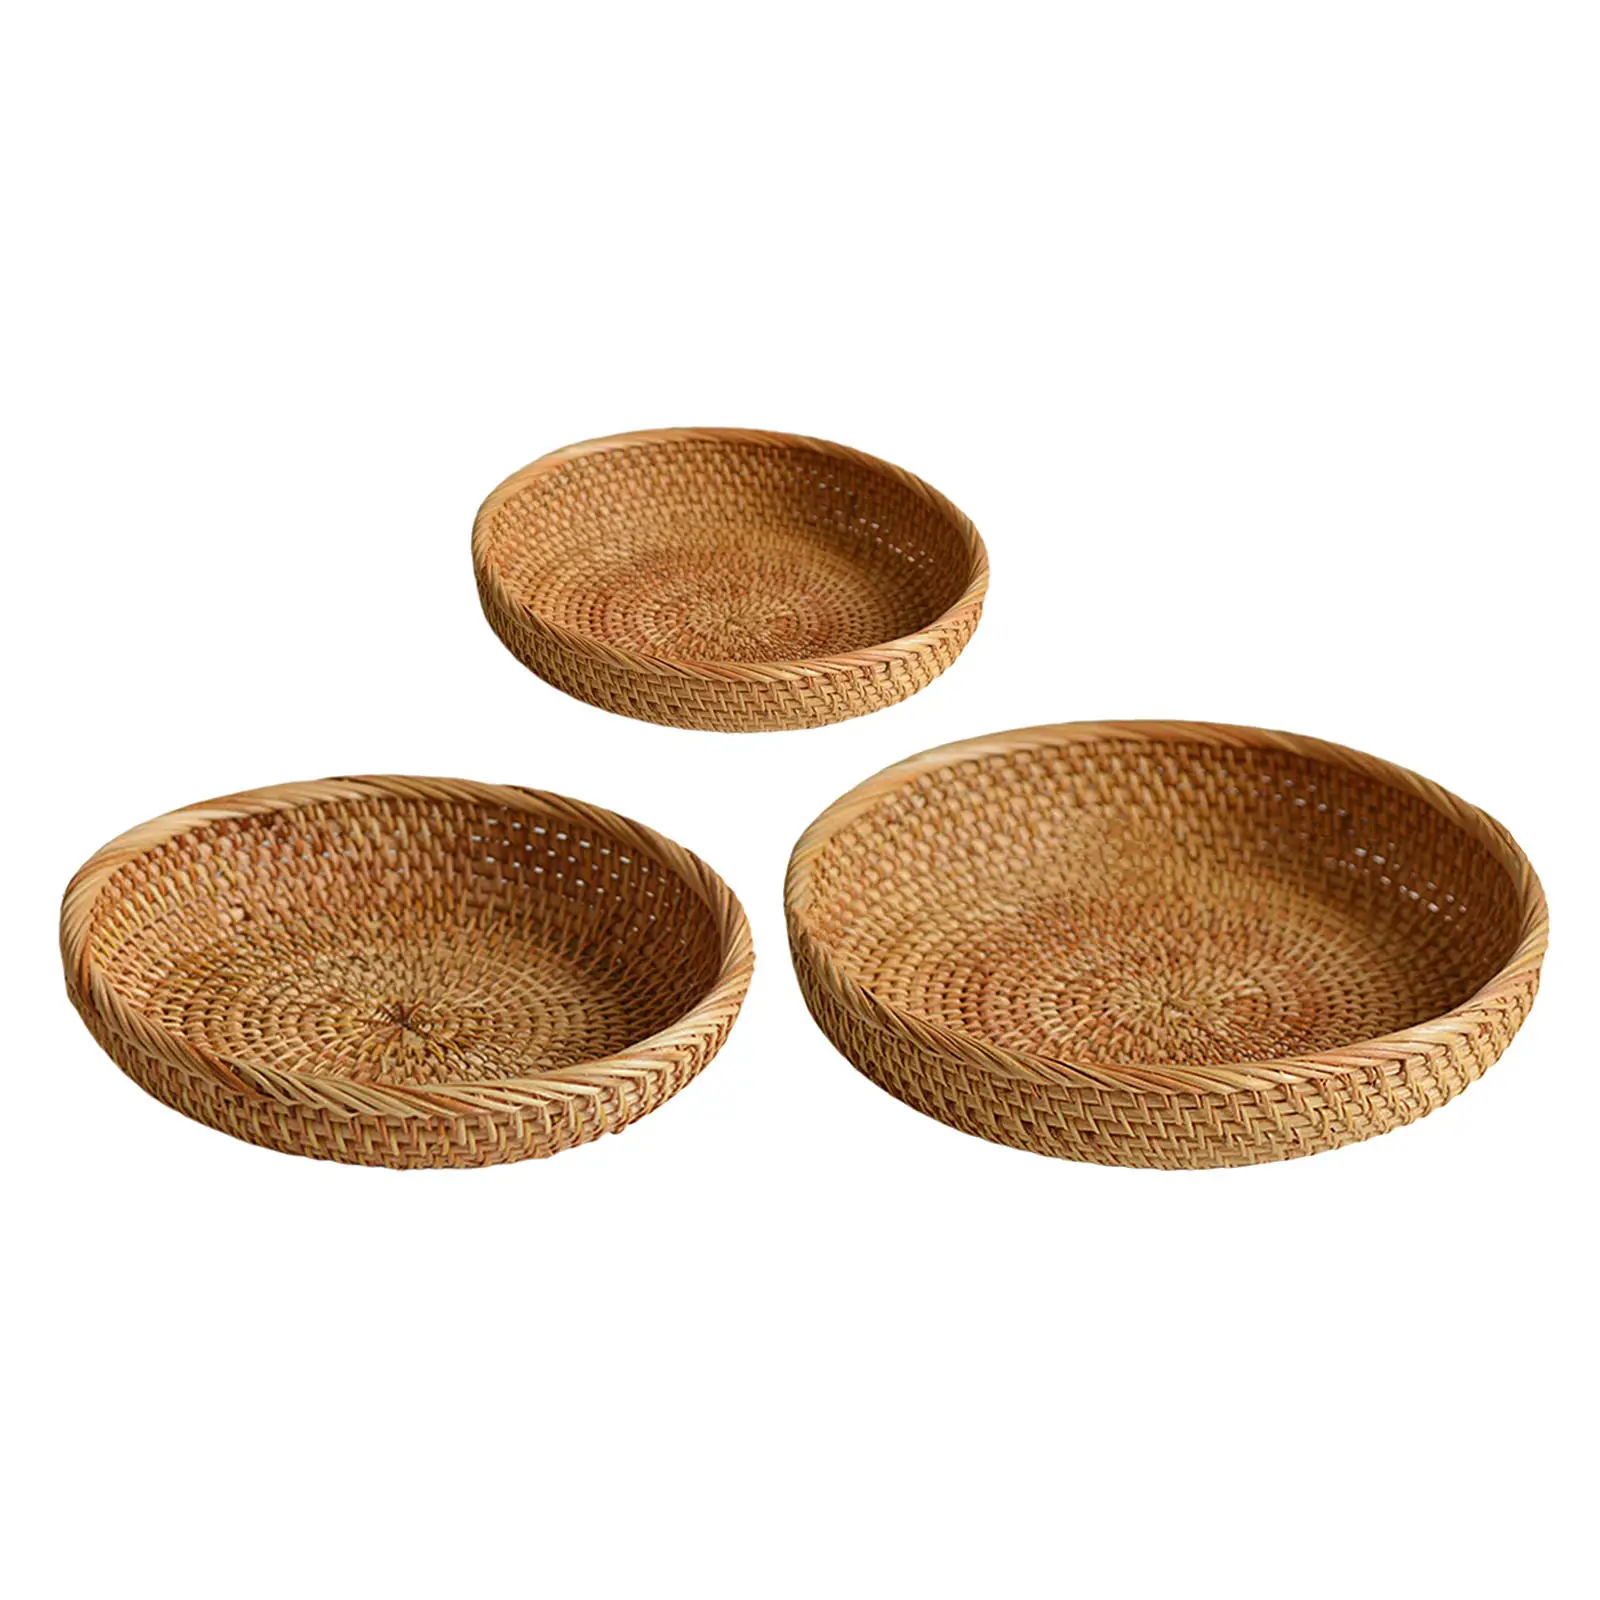 Serving Tray Woven Round Bread Basket Rattan Cracker Tray Storage Tray for Tabletop Decor Parties Fruit Kitchen Display